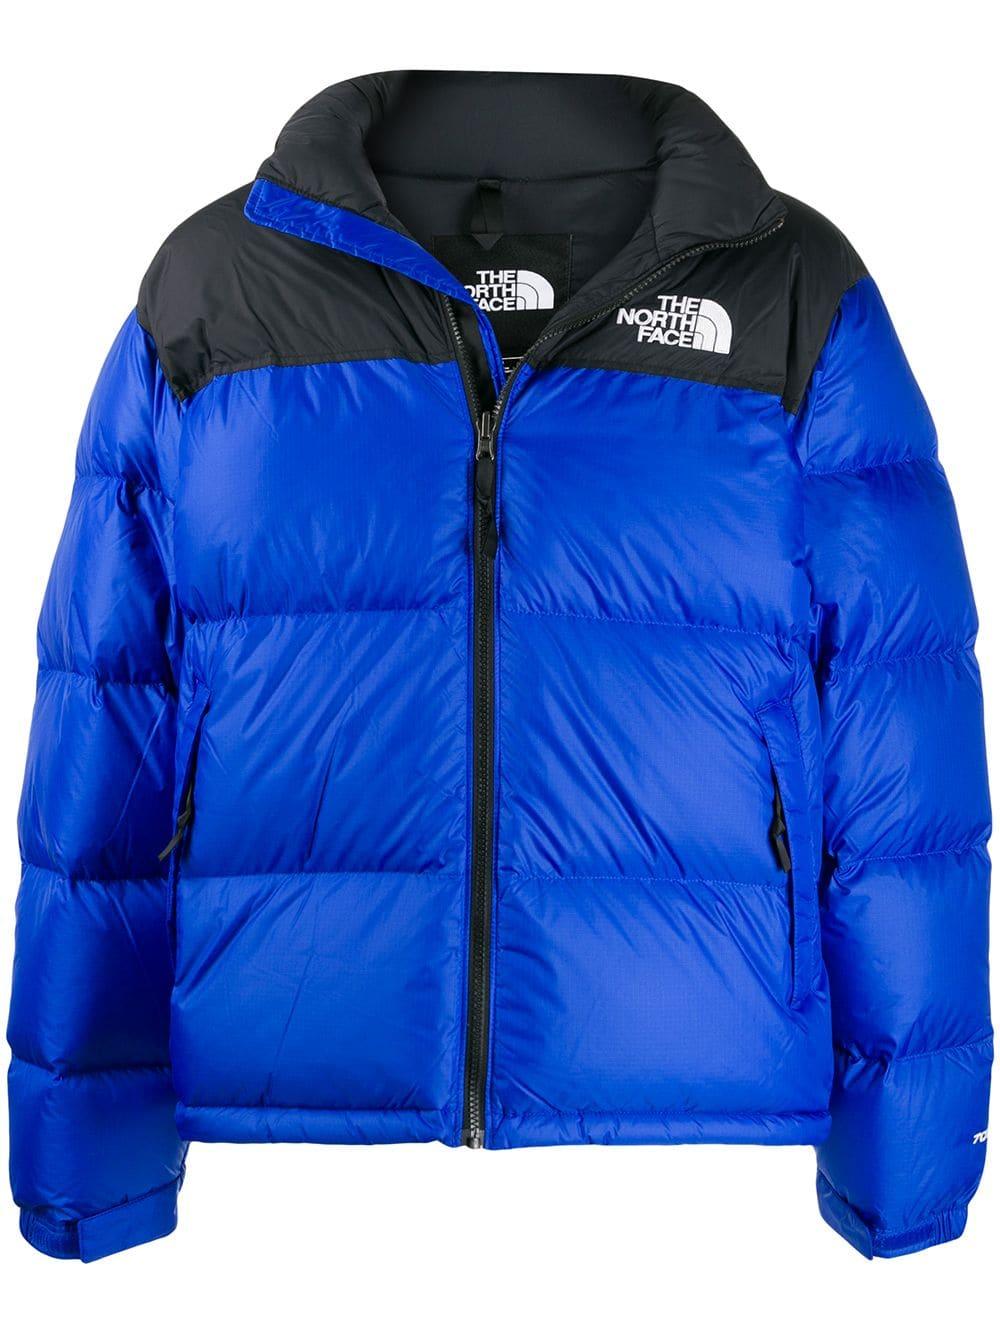 The North Face 1996 Retro Nuptse Down Jacket in Blue for Men - Lyst